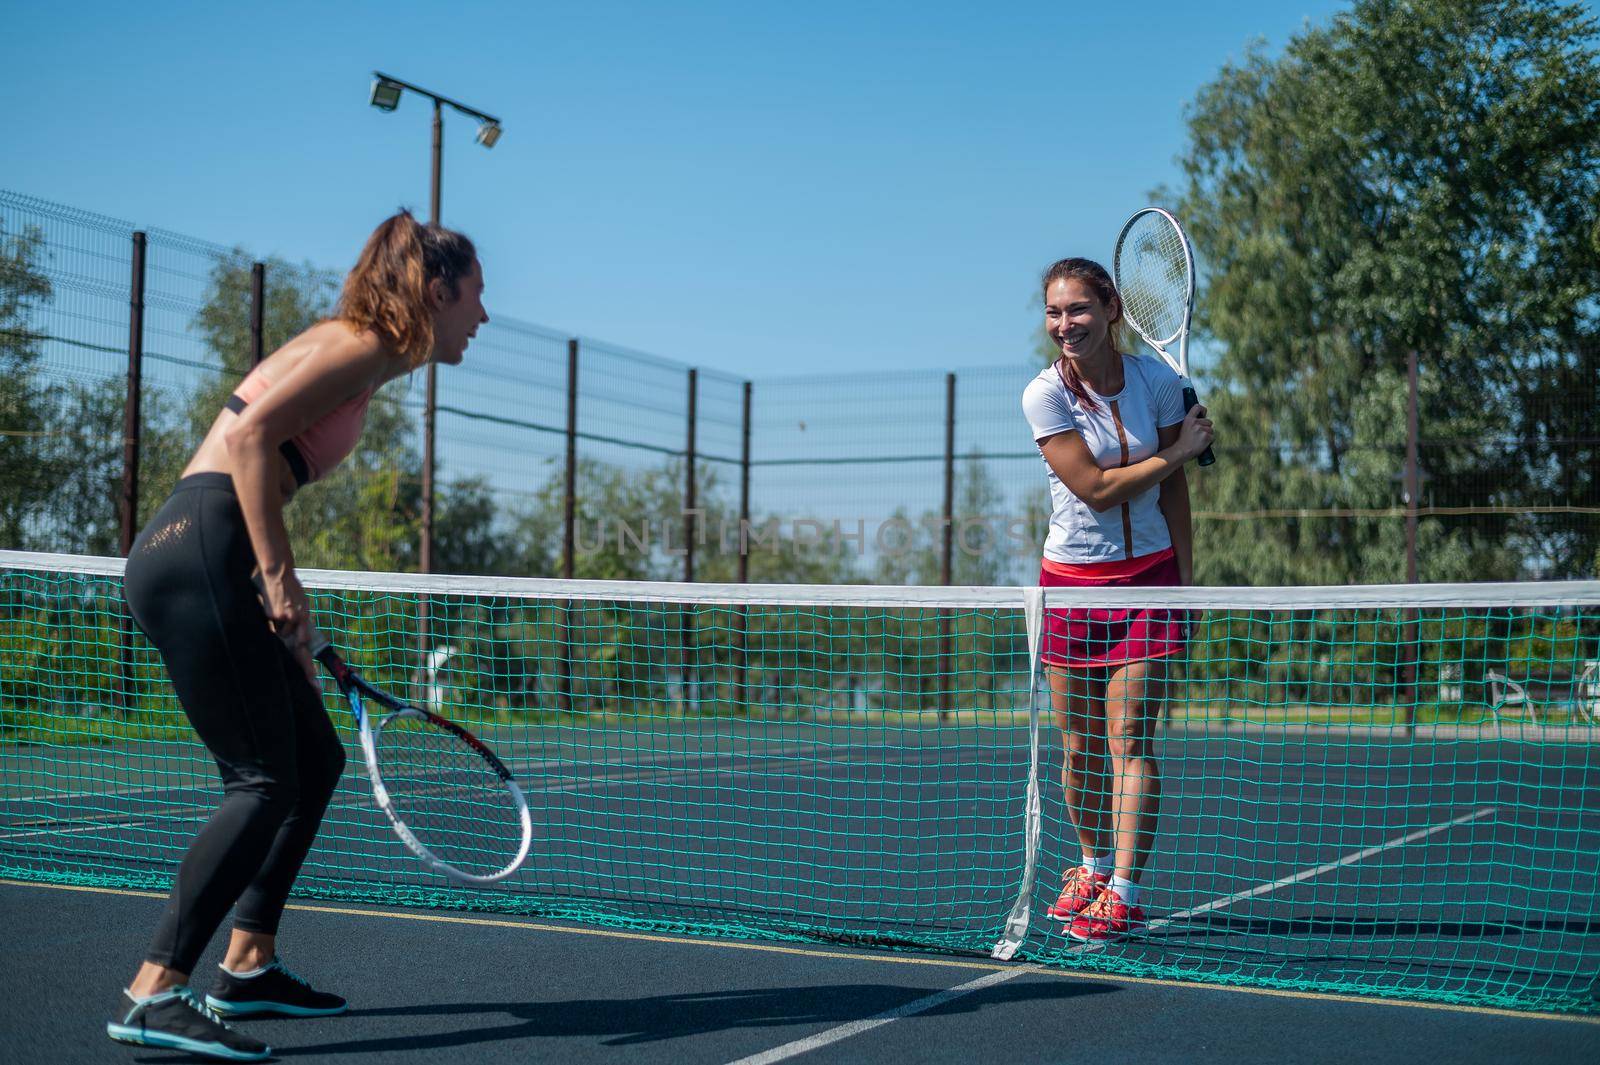 Two athletic young women play tennis on an outdoor court on a hot summer day